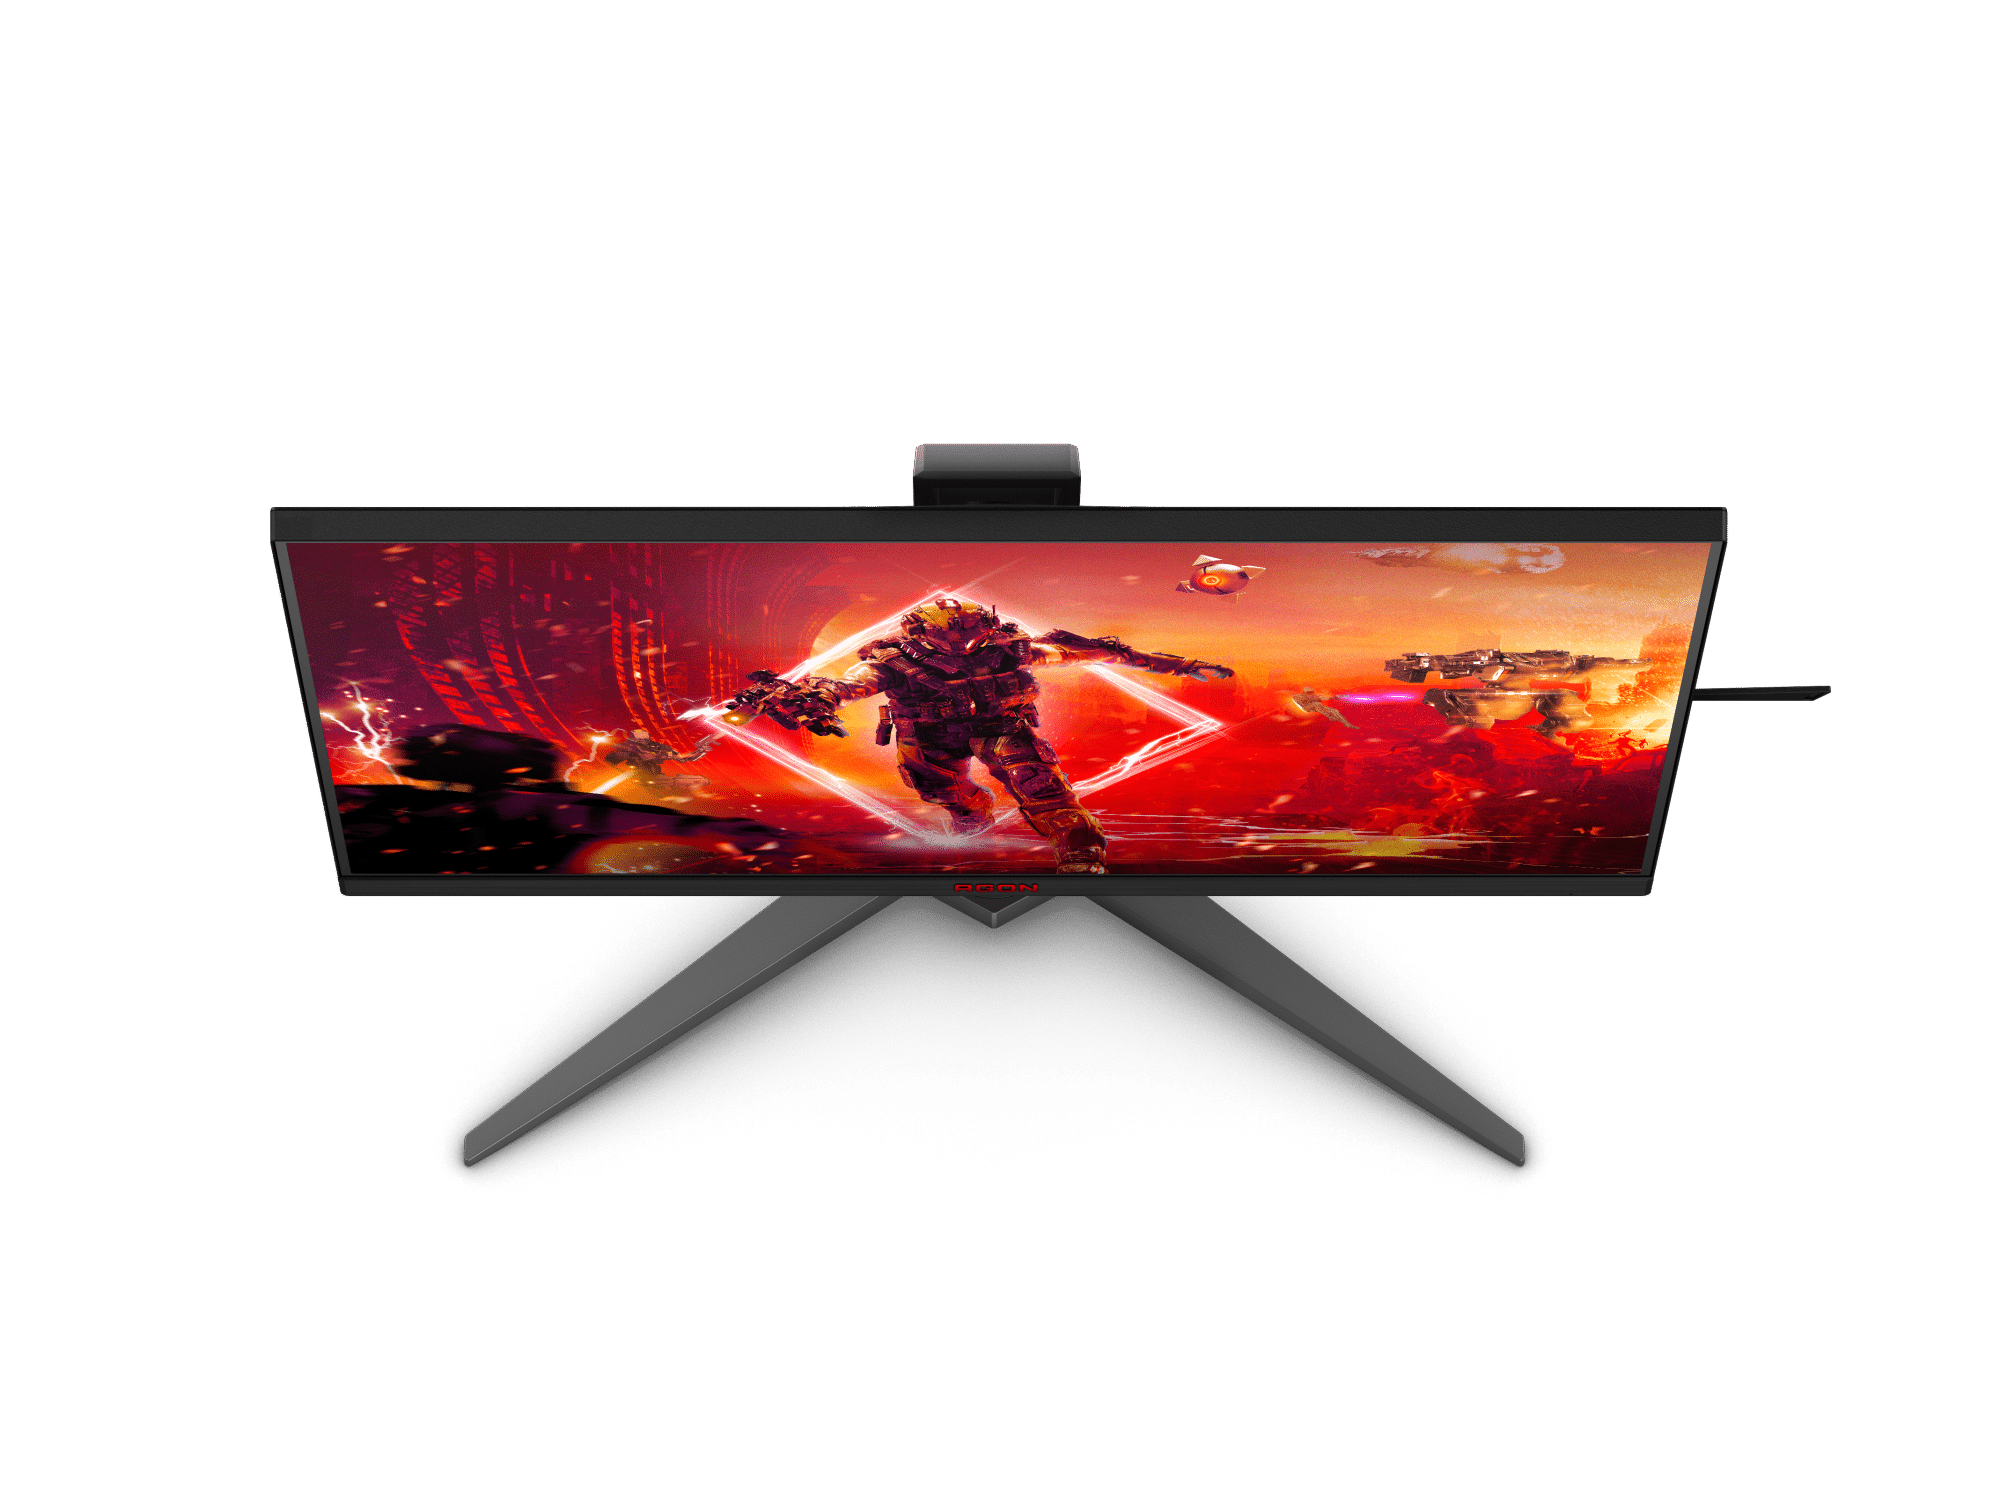 AOC AGON AG275FS is unveiled with a 27 FHD IPS display, 360Hz